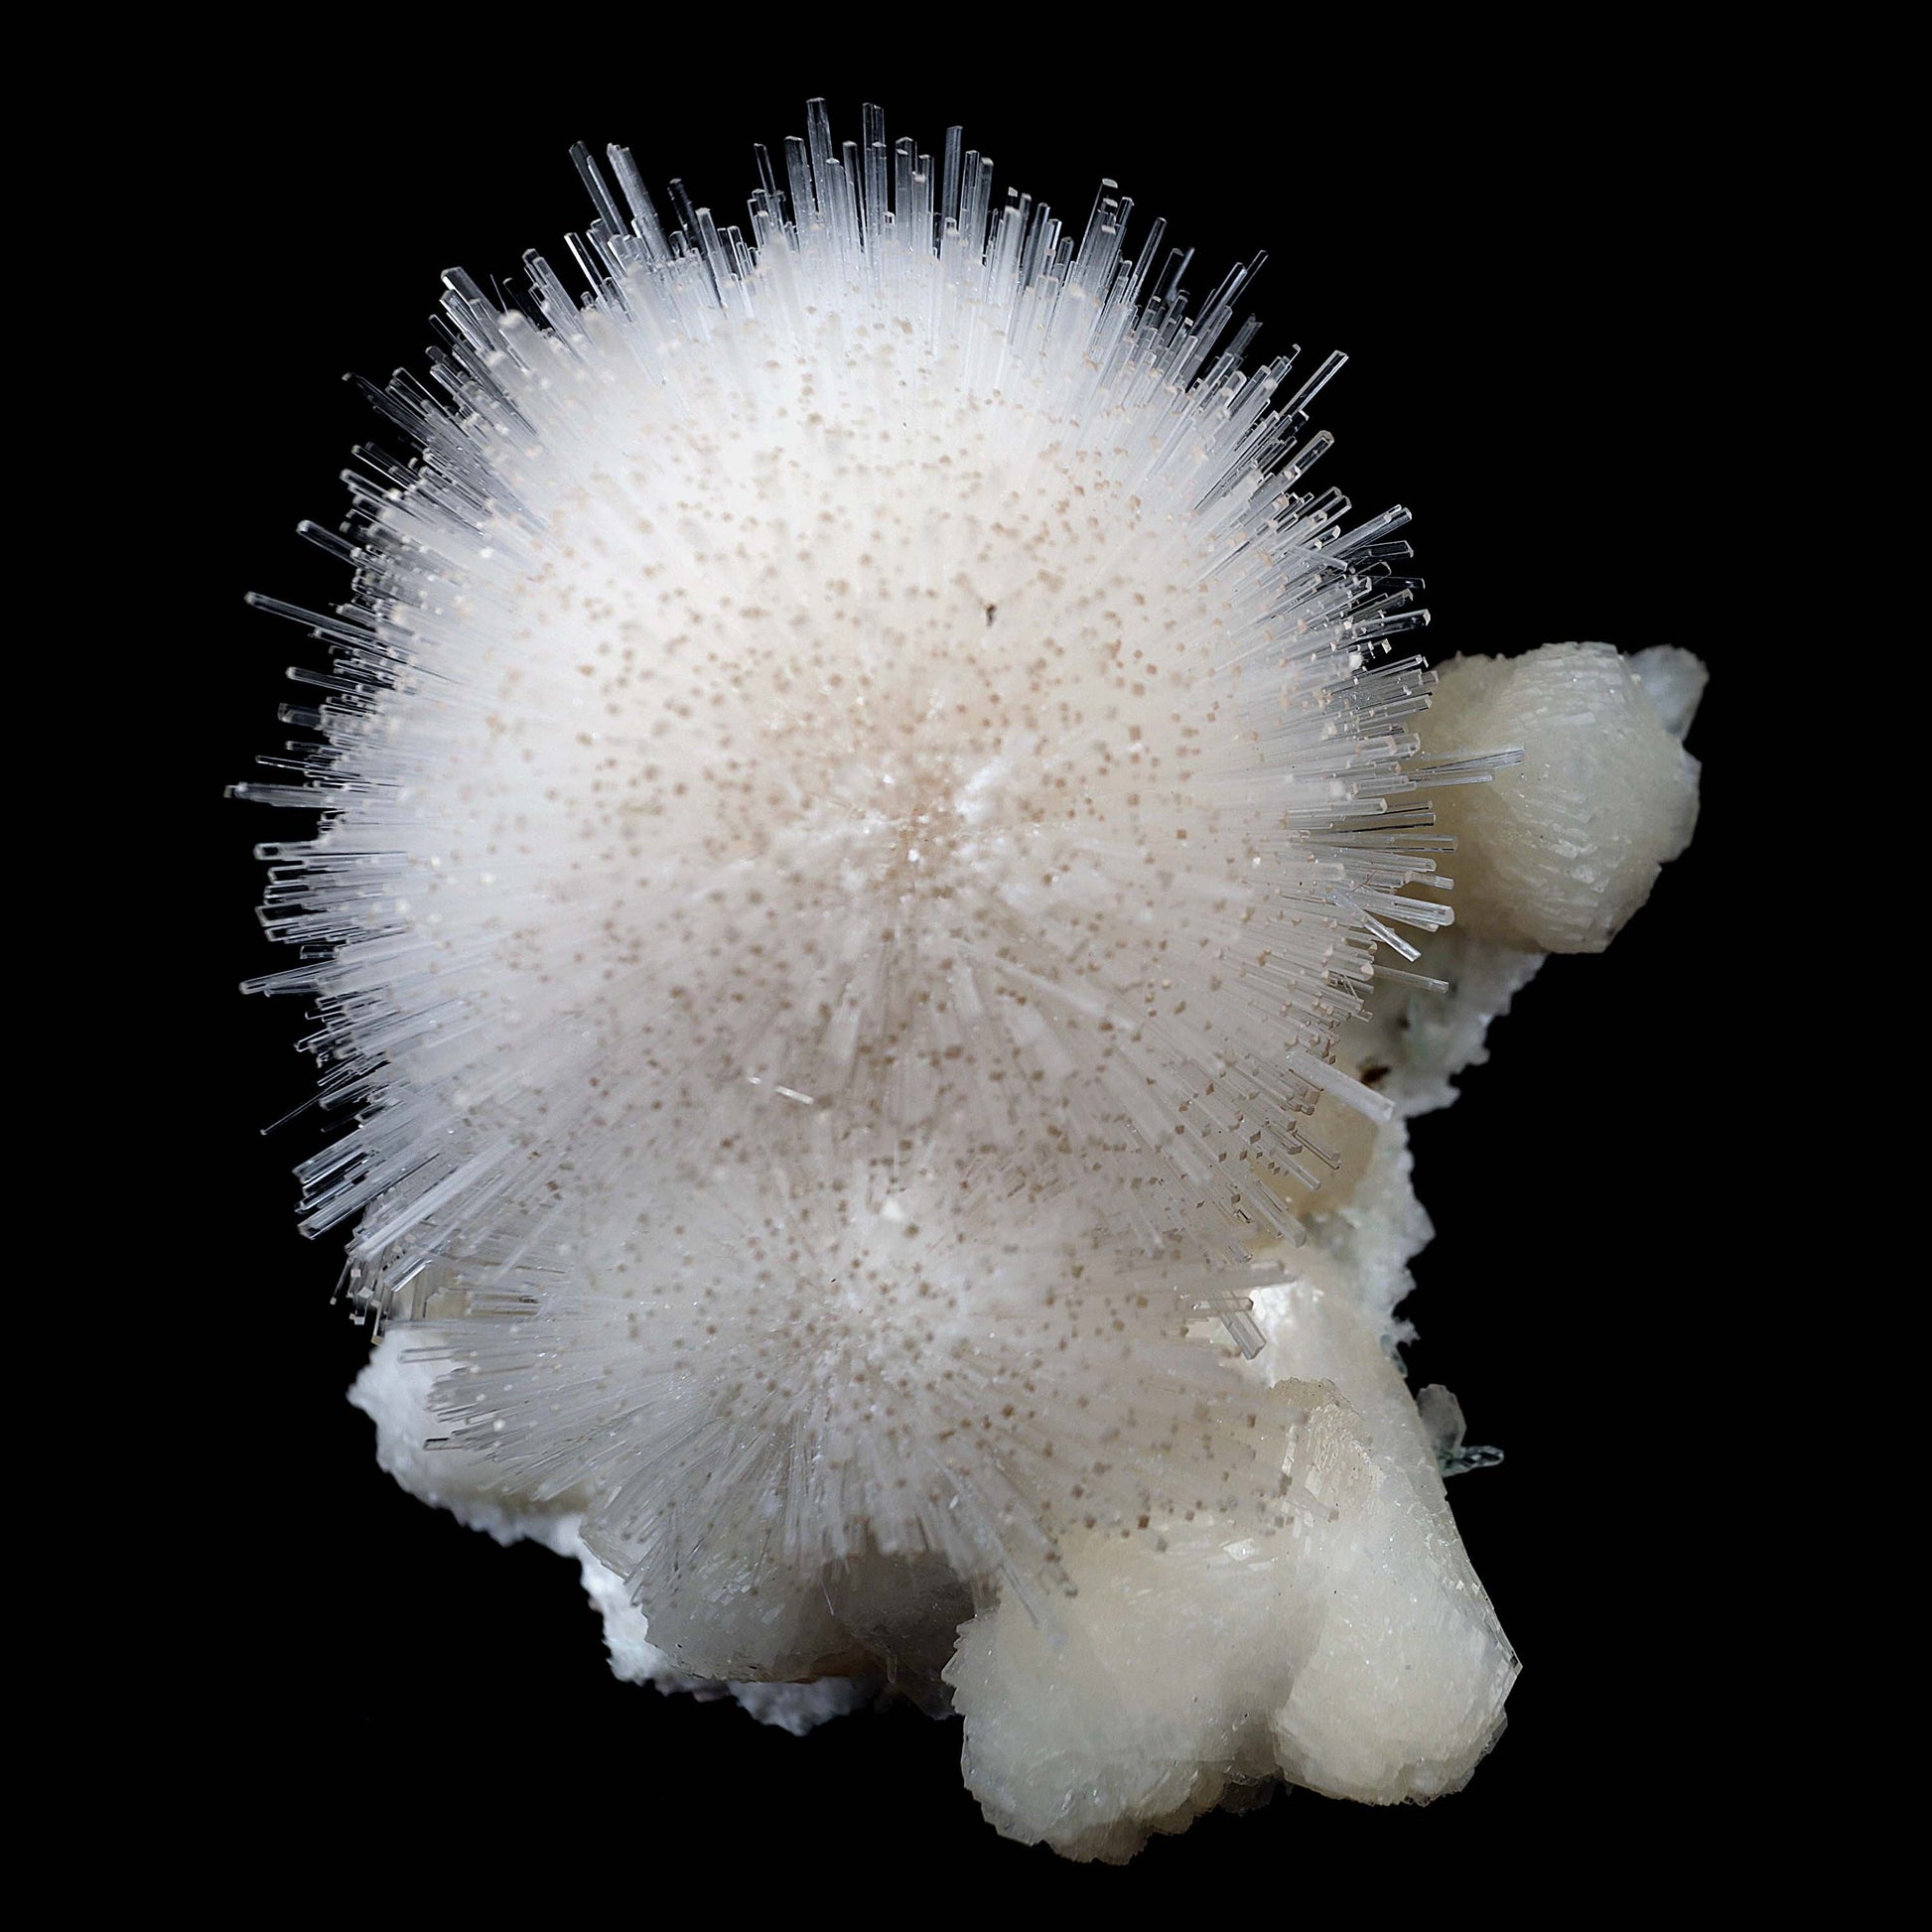 Scoleicte On Stilbite # B 4358  https://www.superbminerals.us/products/scoleicte-on-stilbite-b-4358  Features:A stunning specimen featuring a large, hemispherical formation of colorless, transparent, lustrous acicular Scolecite crystals on peach-colored Stilbite. An amazing piece with superb crystal formation, contrast, luster and contrast. In excellent condition. A great addition to any collection.